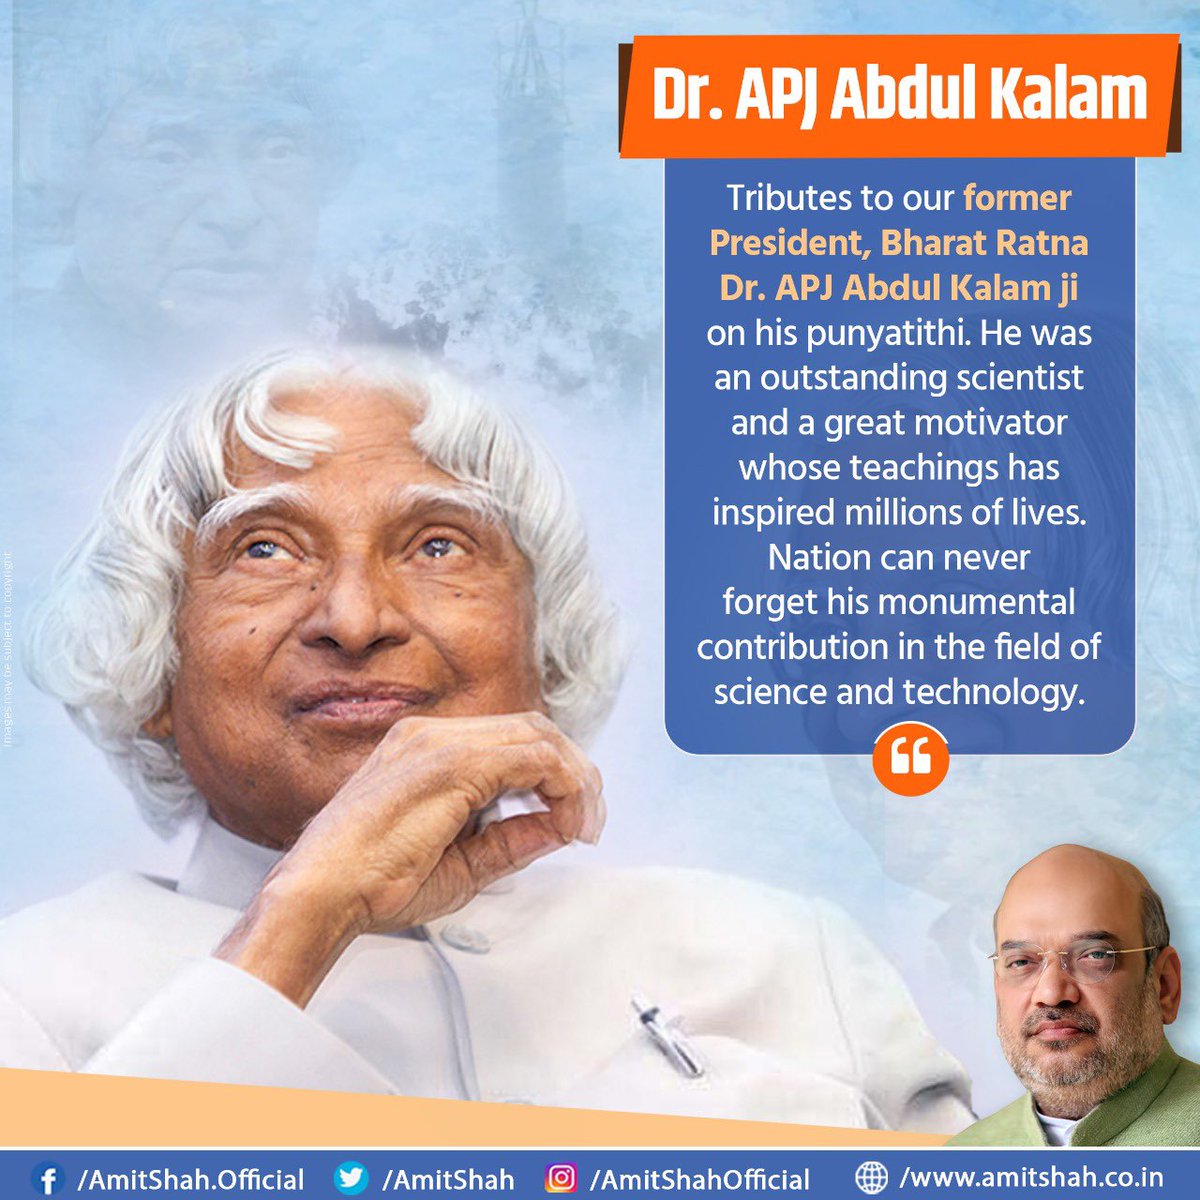 Tributes to our former President, Bharat Ratna Dr. APJ Abdul Kalam ji on his punyatithi. He was an outstanding scientist and a great motivator whose teachings has inspired millions of lives. Nation can never forget his monumental contribution in the field of science & technology.